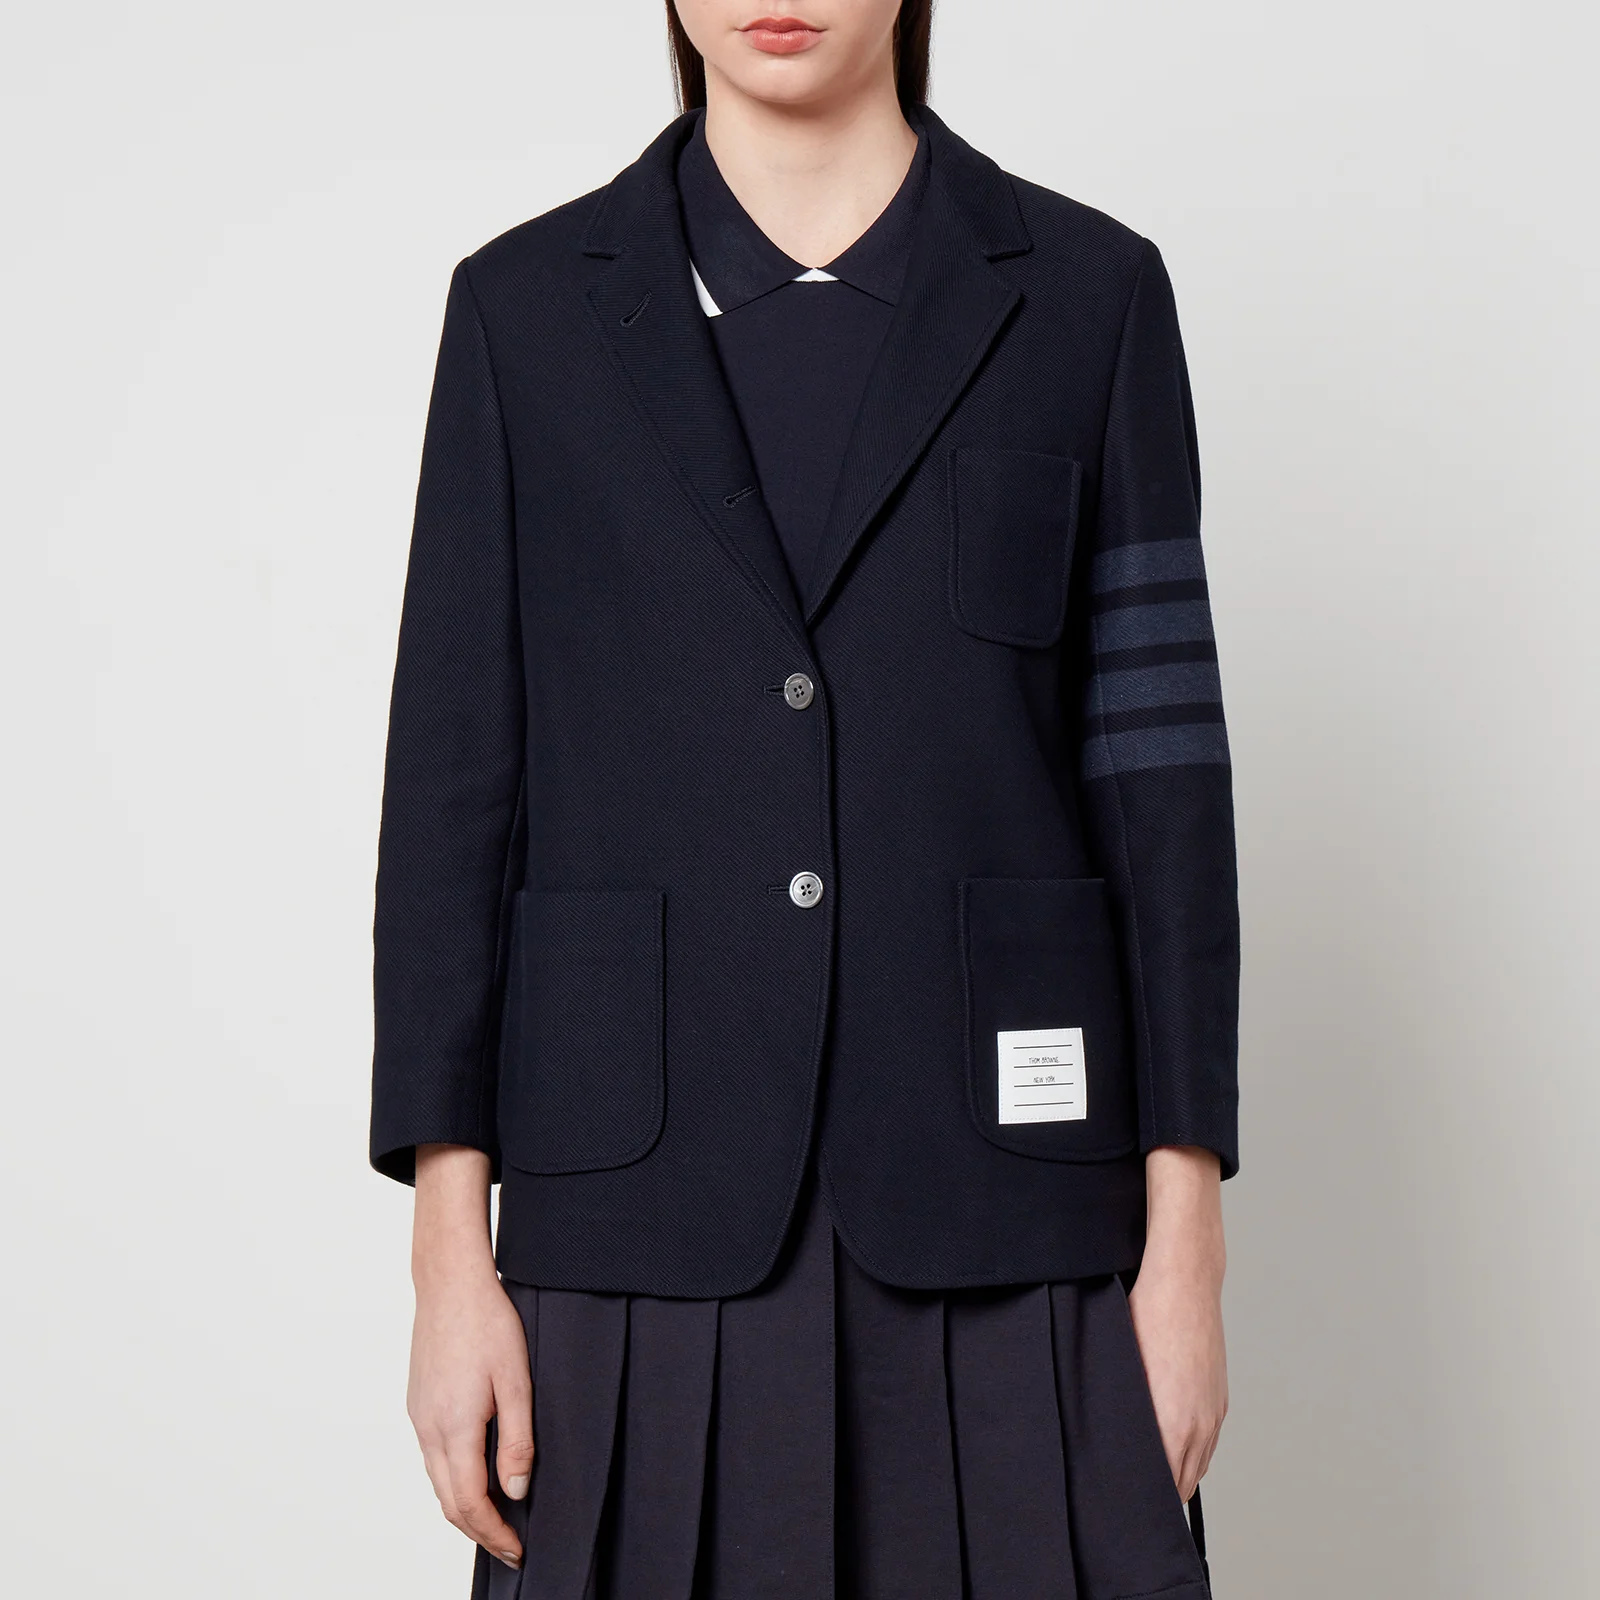 Thom Browne Double-Faced Cotton Blazer Image 1